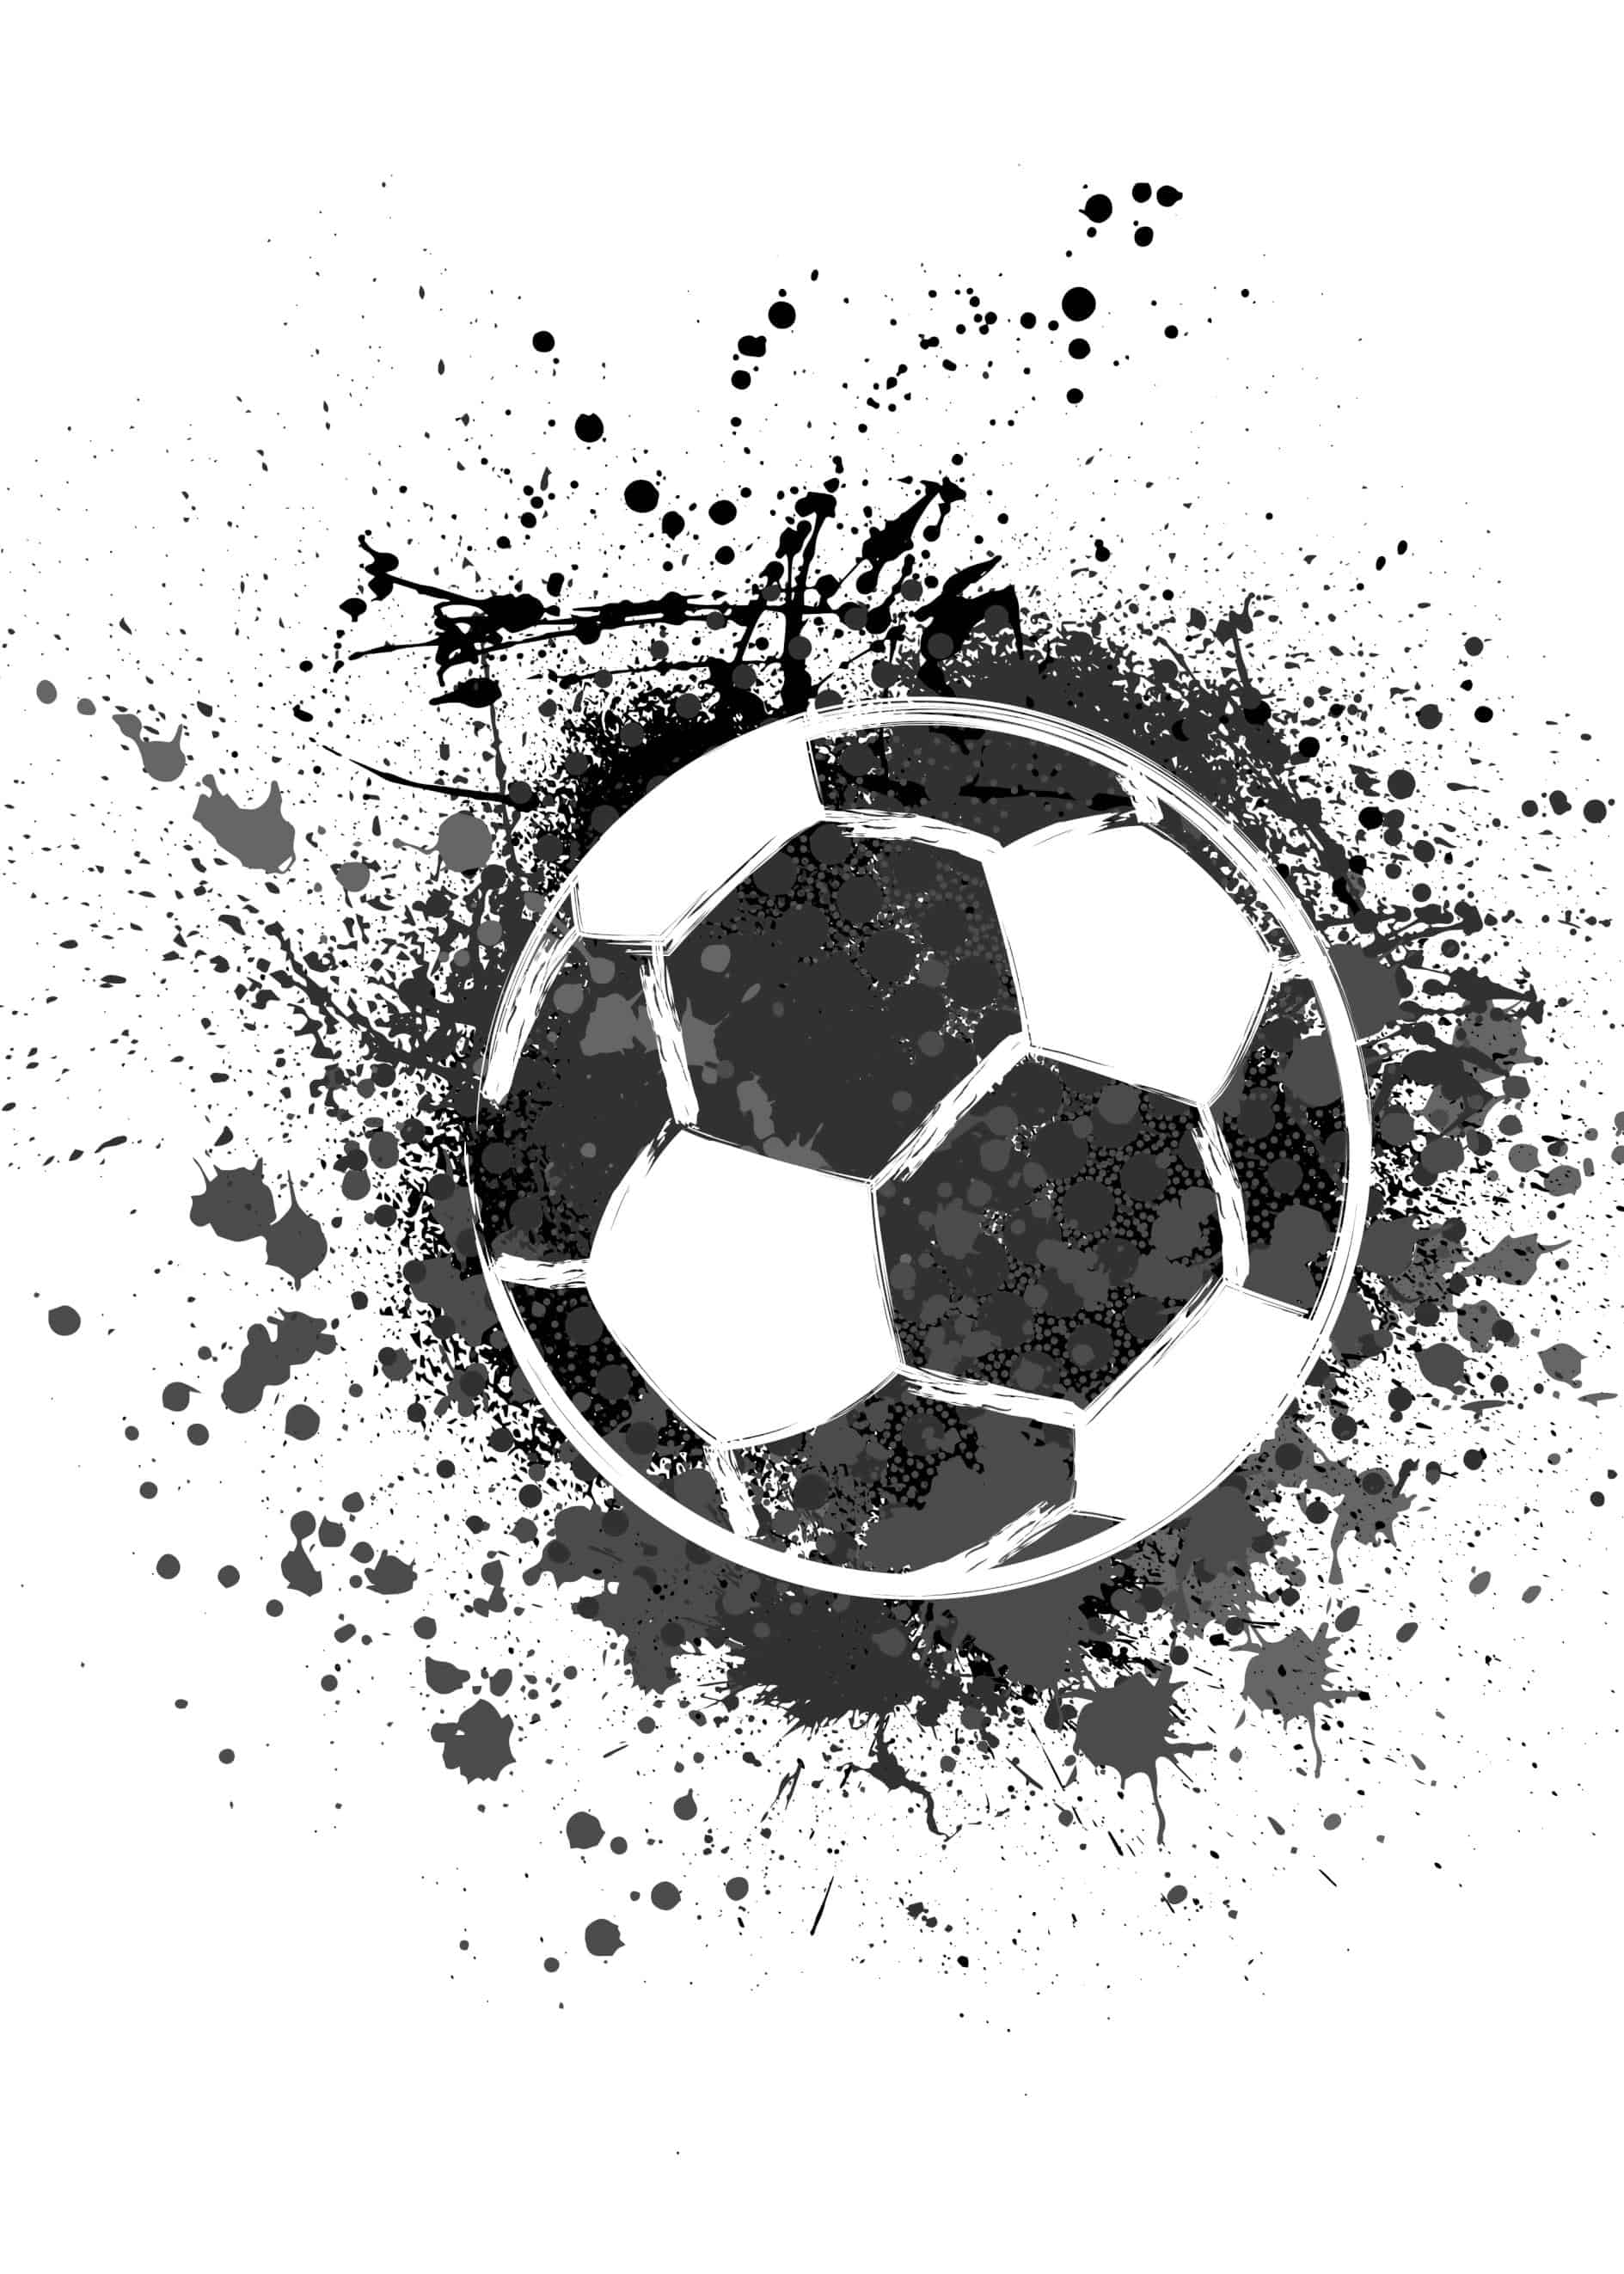 Football with splashed ink poster | Print by Artsy Bucket